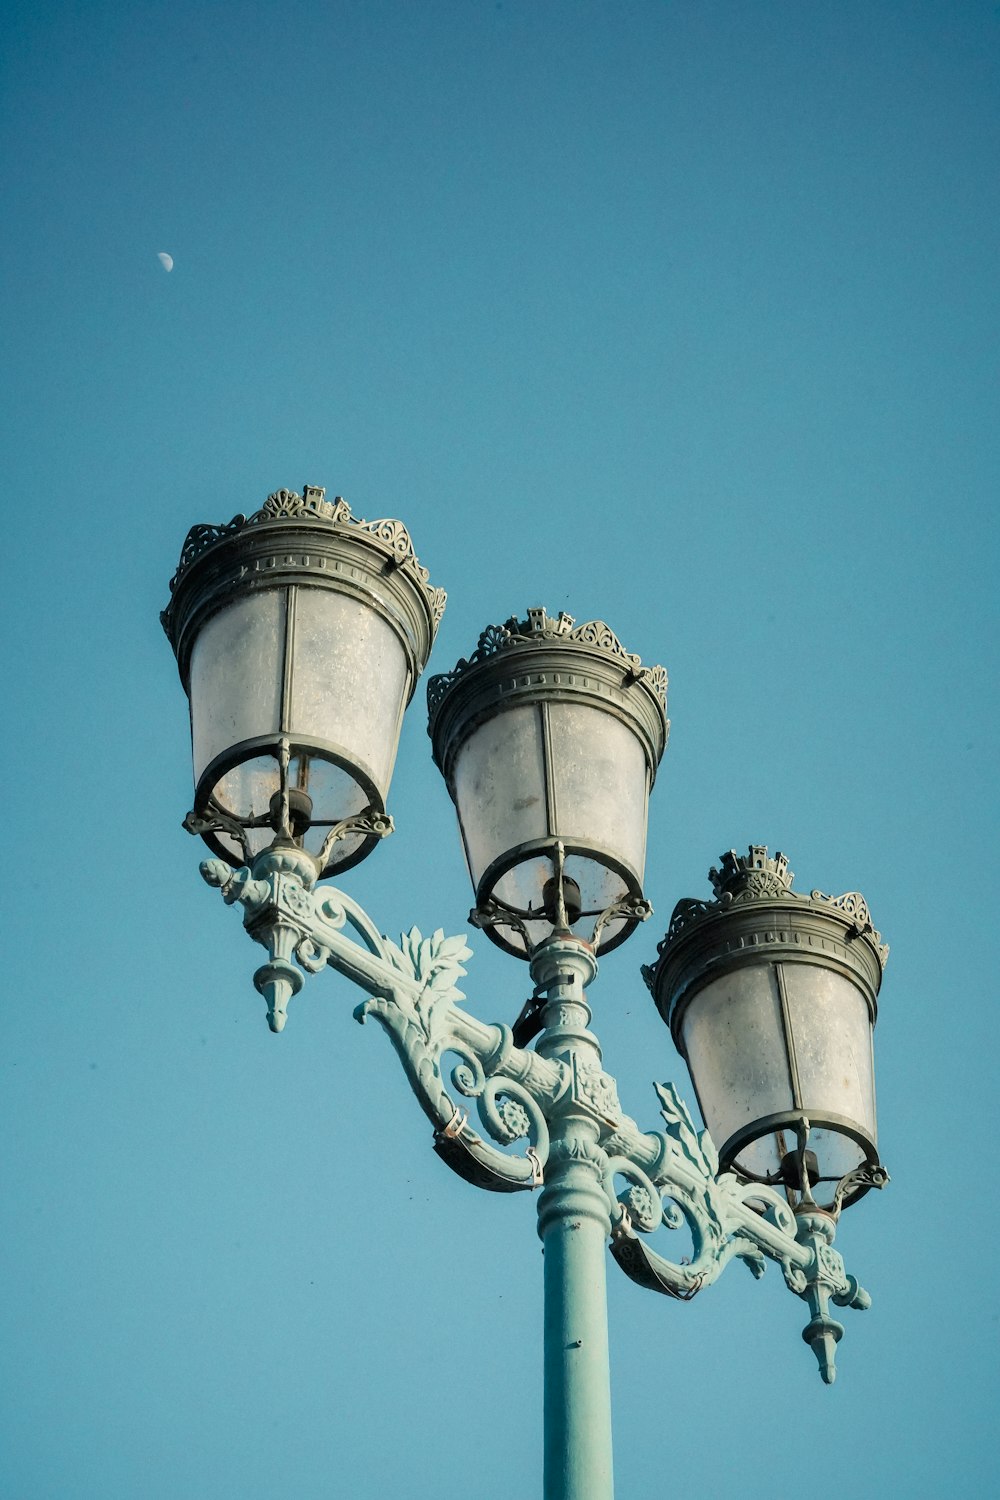 Lampadaire Pictures | Download Free Images on Unsplash